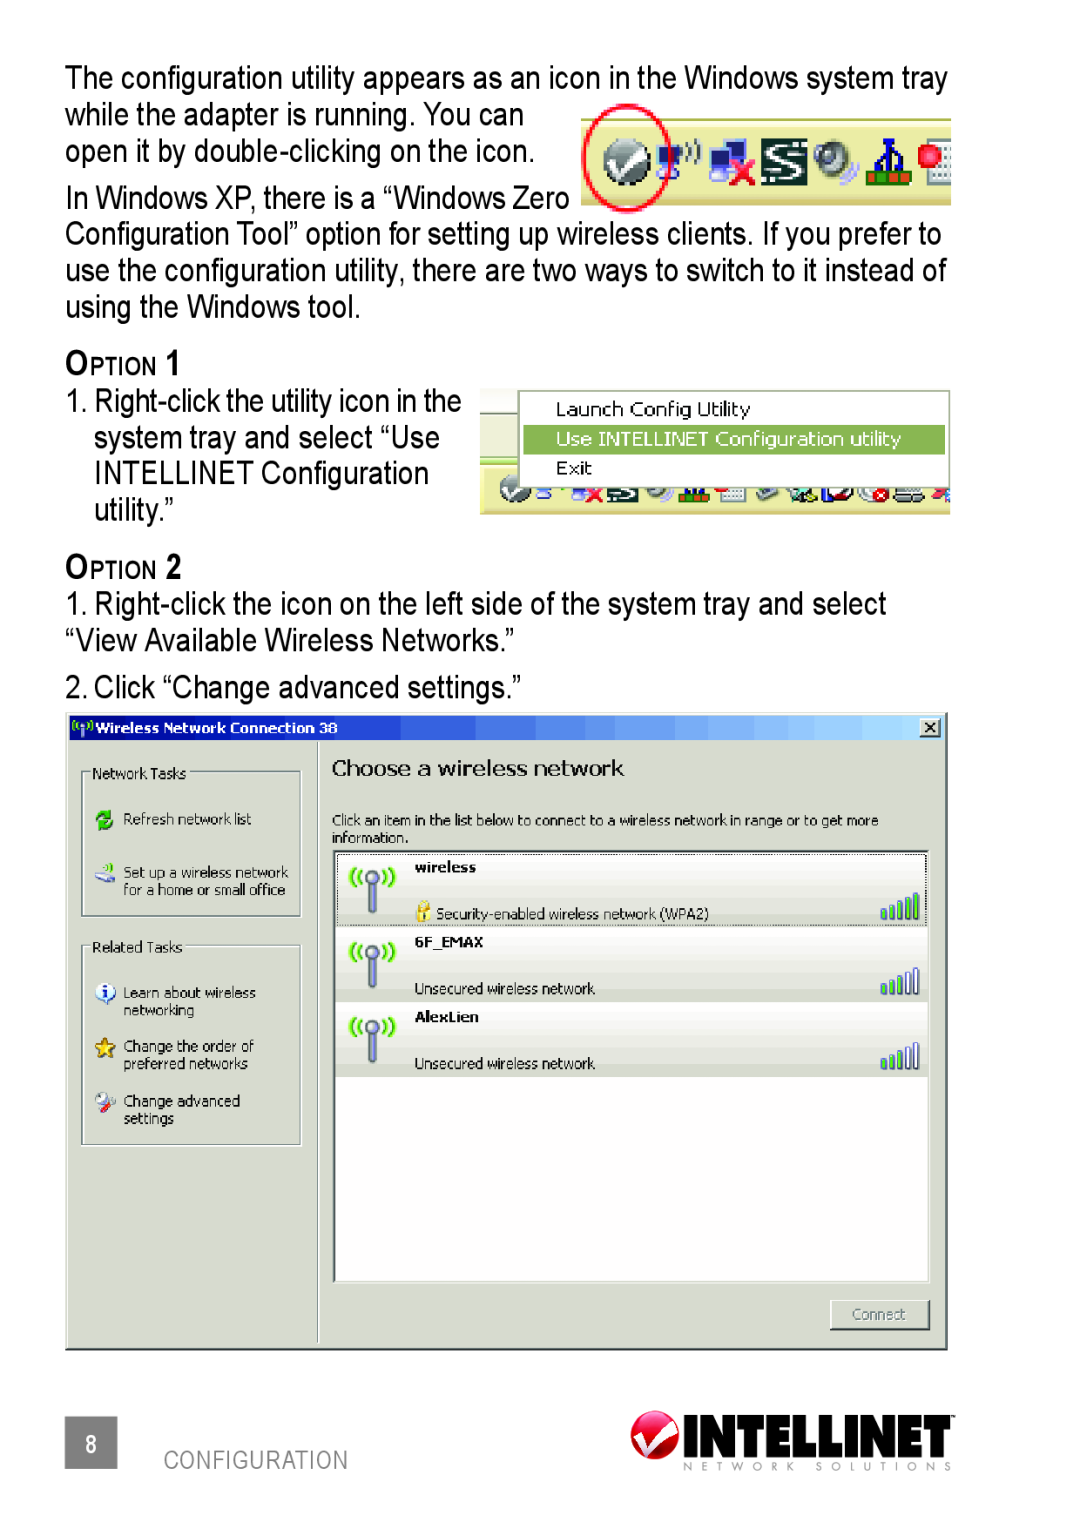 Intellinet Network Solutions 524438 user manual open it by double-clicking on the icon 